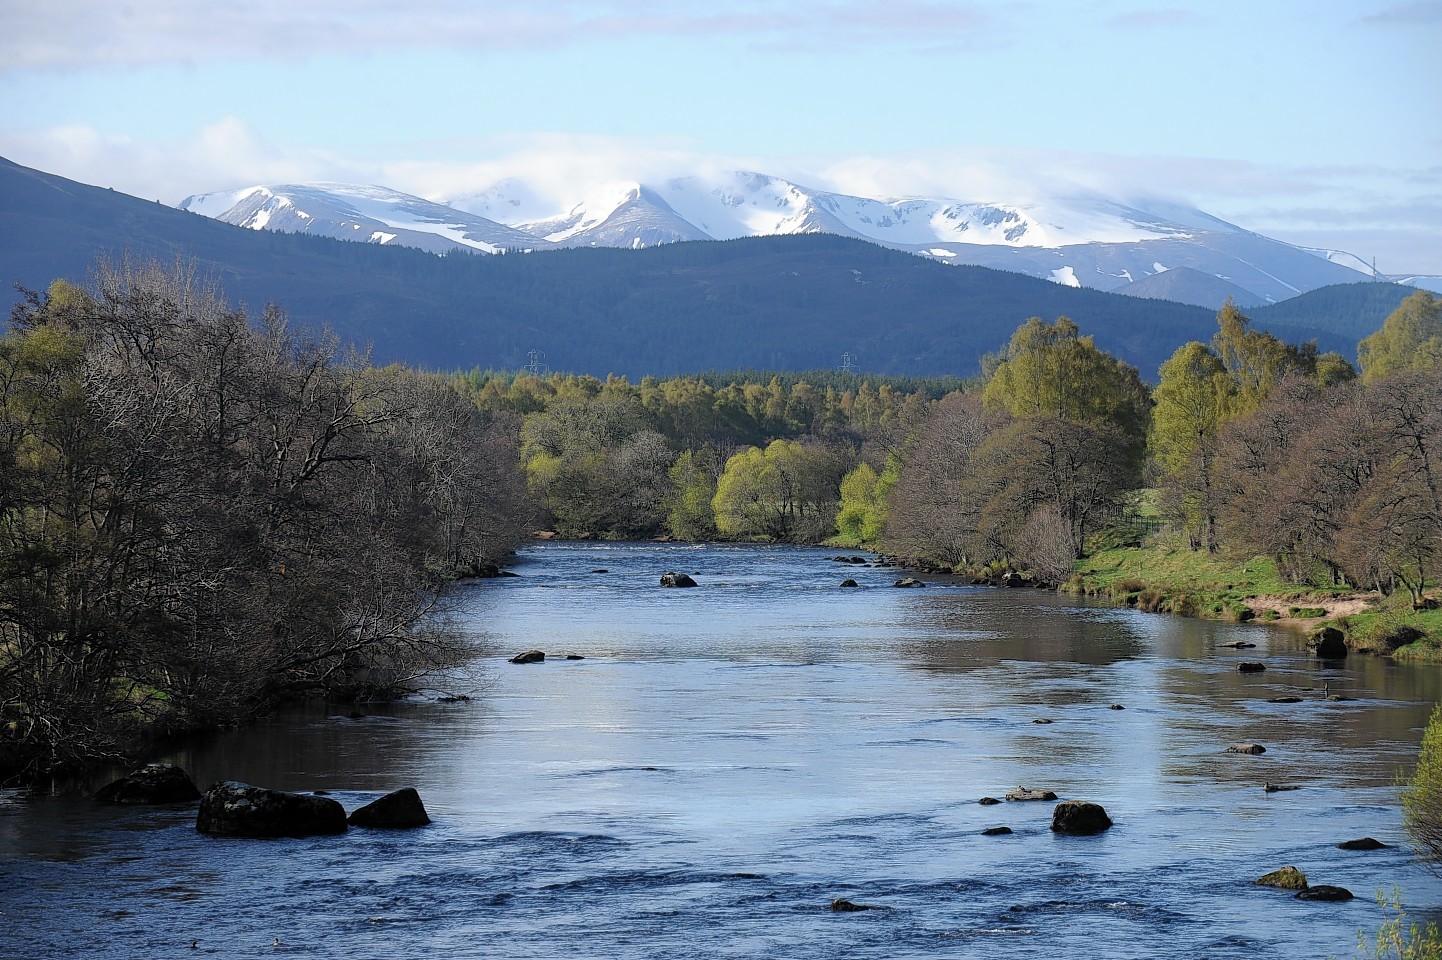 The angler was fishing in the River Spey